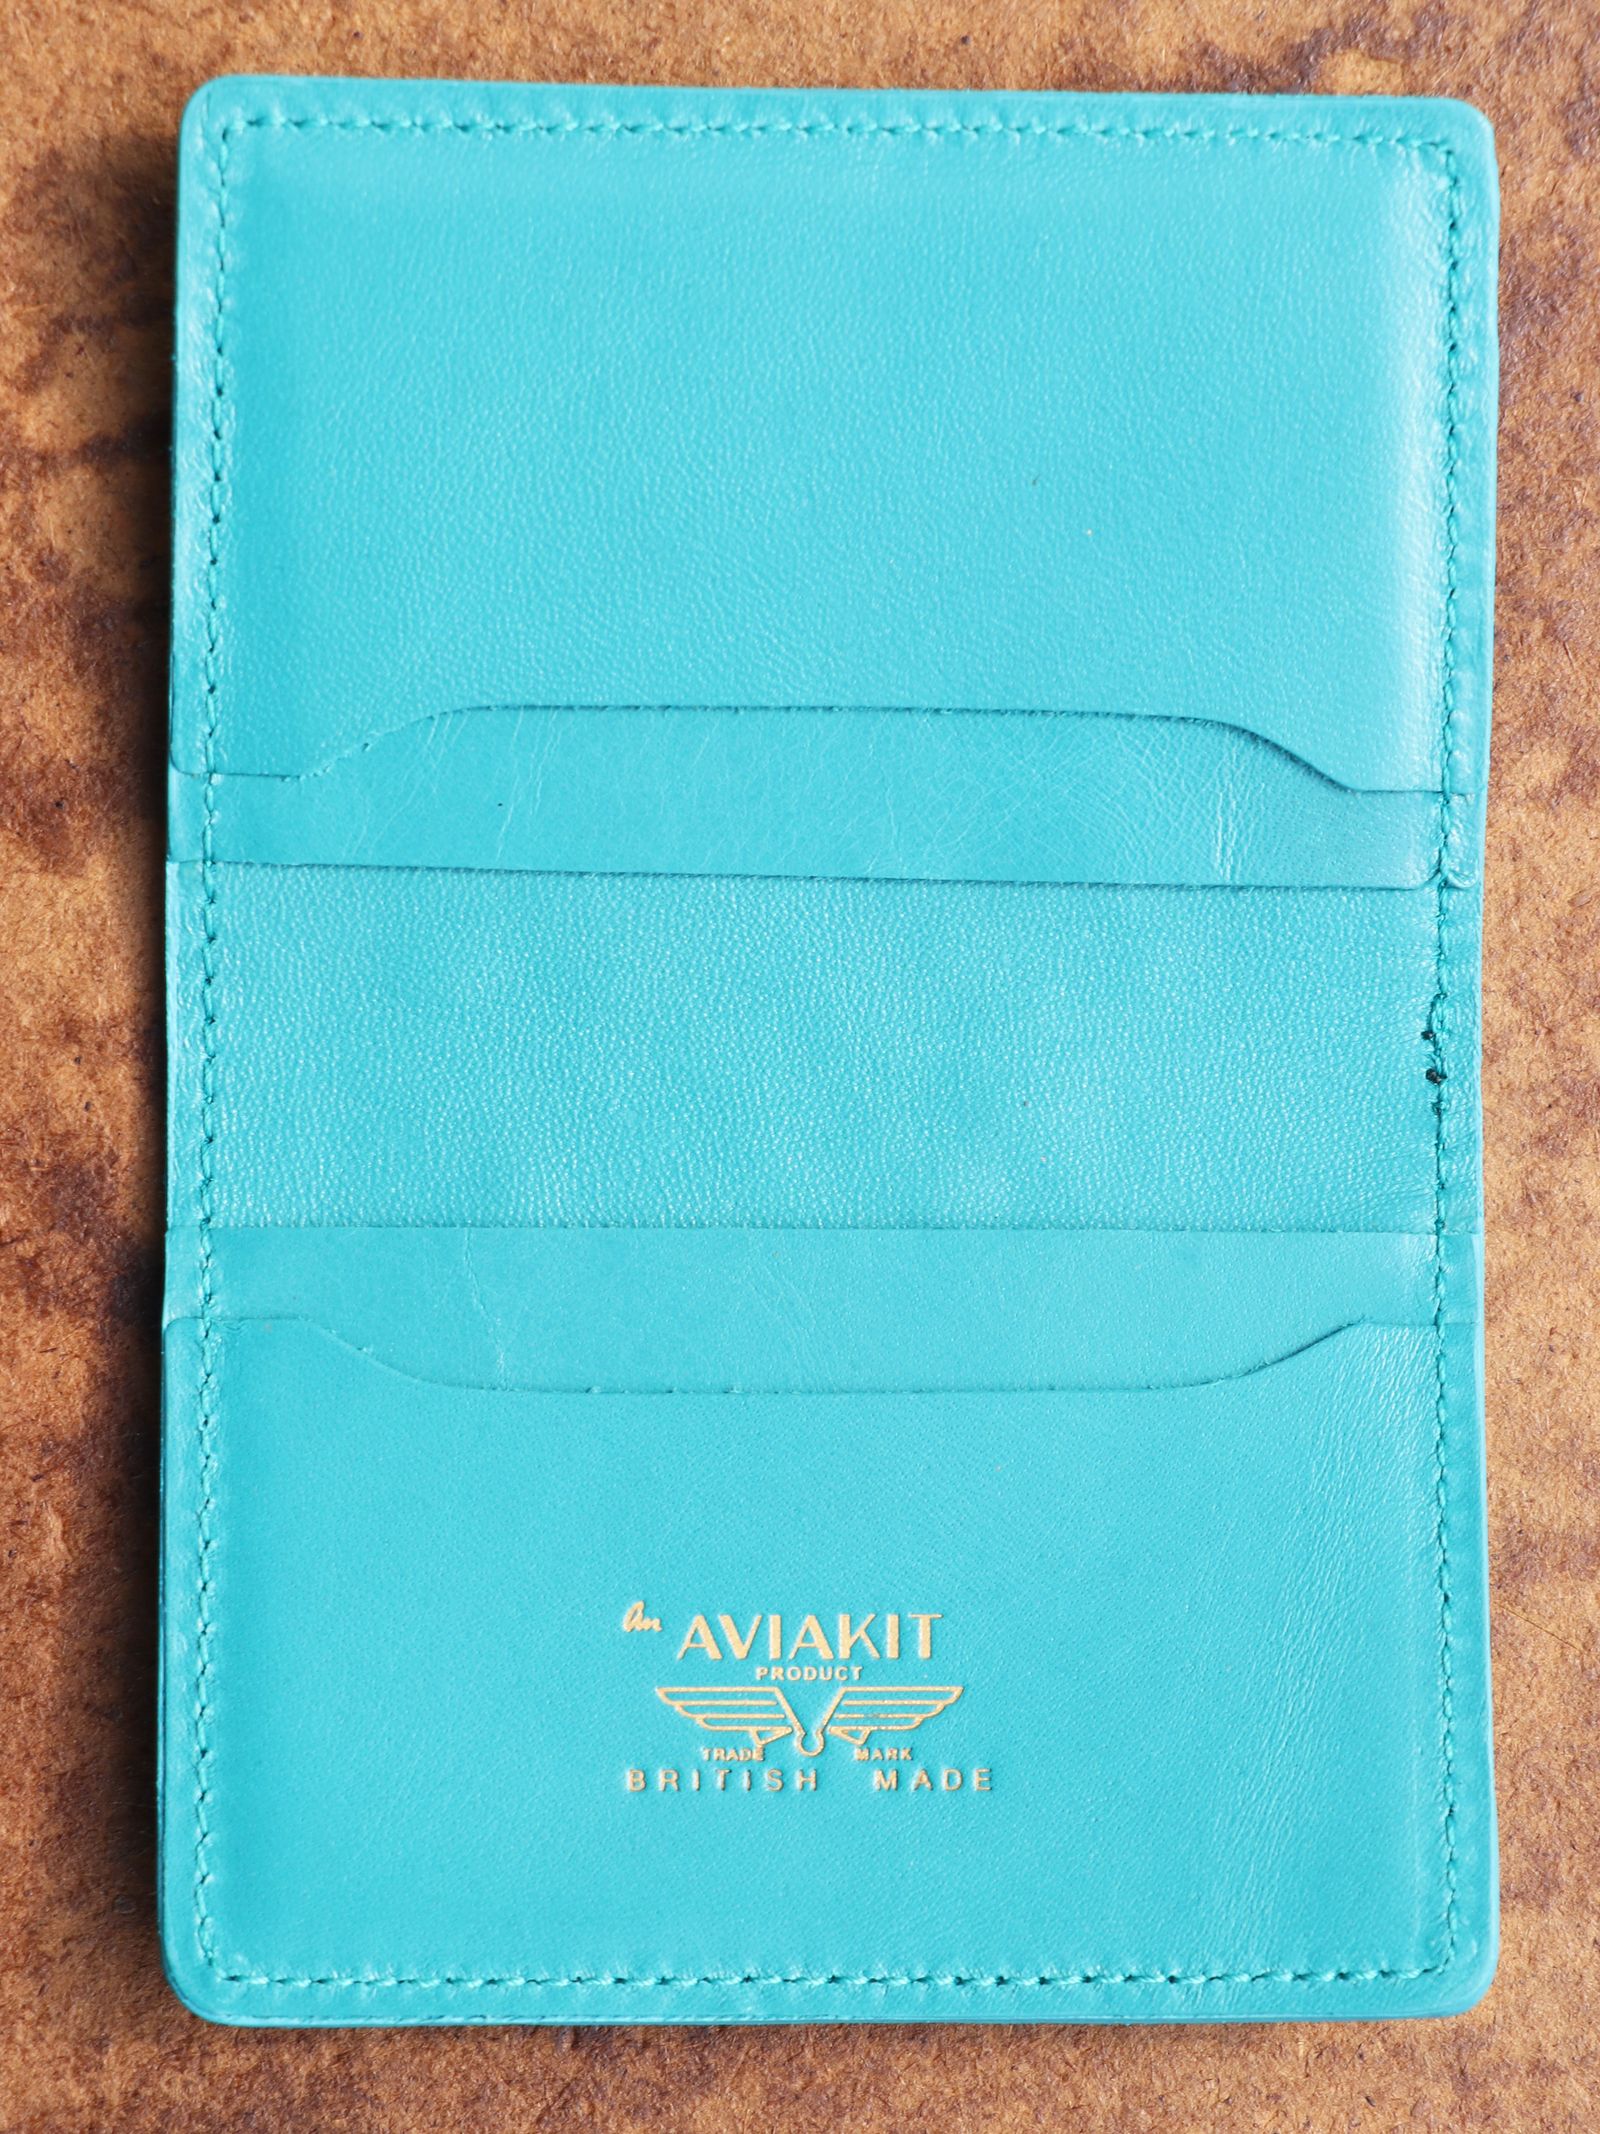 Lewis Leathers - 【即日発送可能】LEWIS LEATHERS CARD CASE